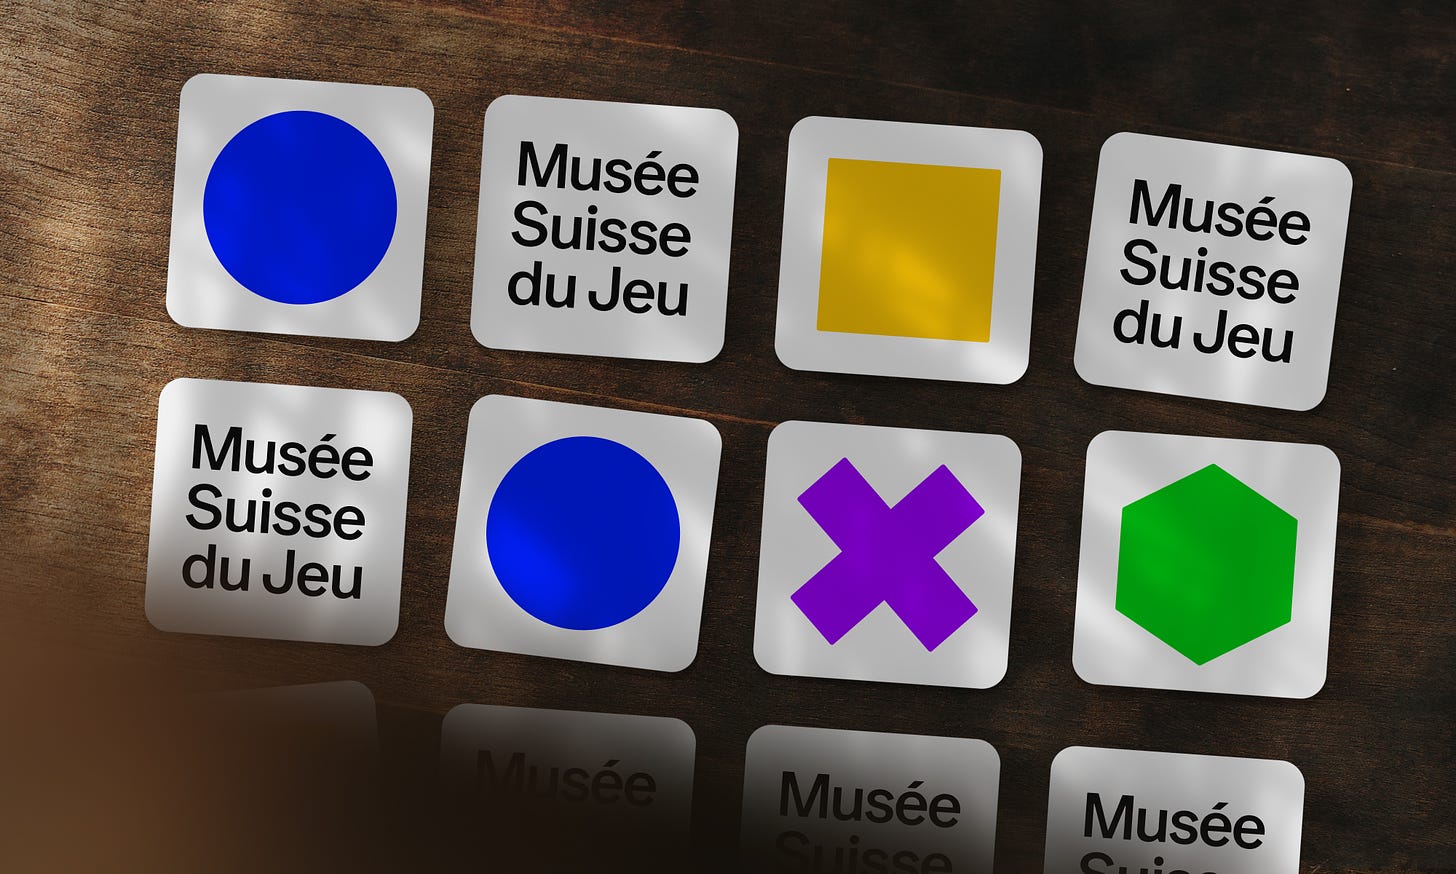 Various cards for Musée Suisse du Jeu featuring colourful shapes (blue circles, yellow square, purple "X", green hexagon) and the museum's name.